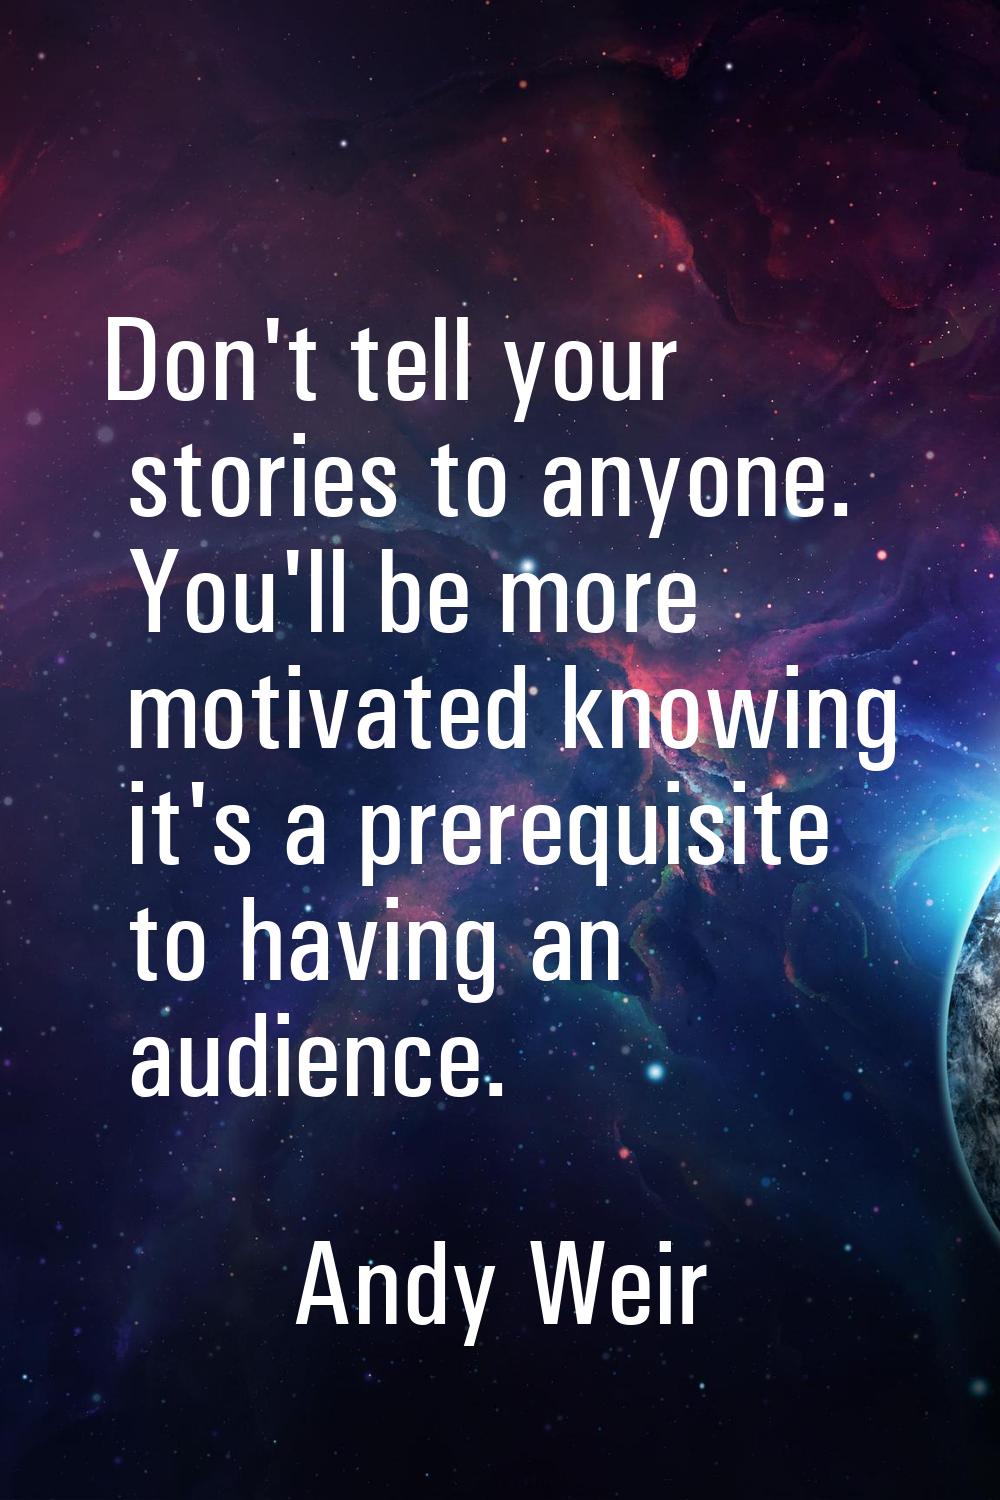 Don't tell your stories to anyone. You'll be more motivated knowing it's a prerequisite to having a